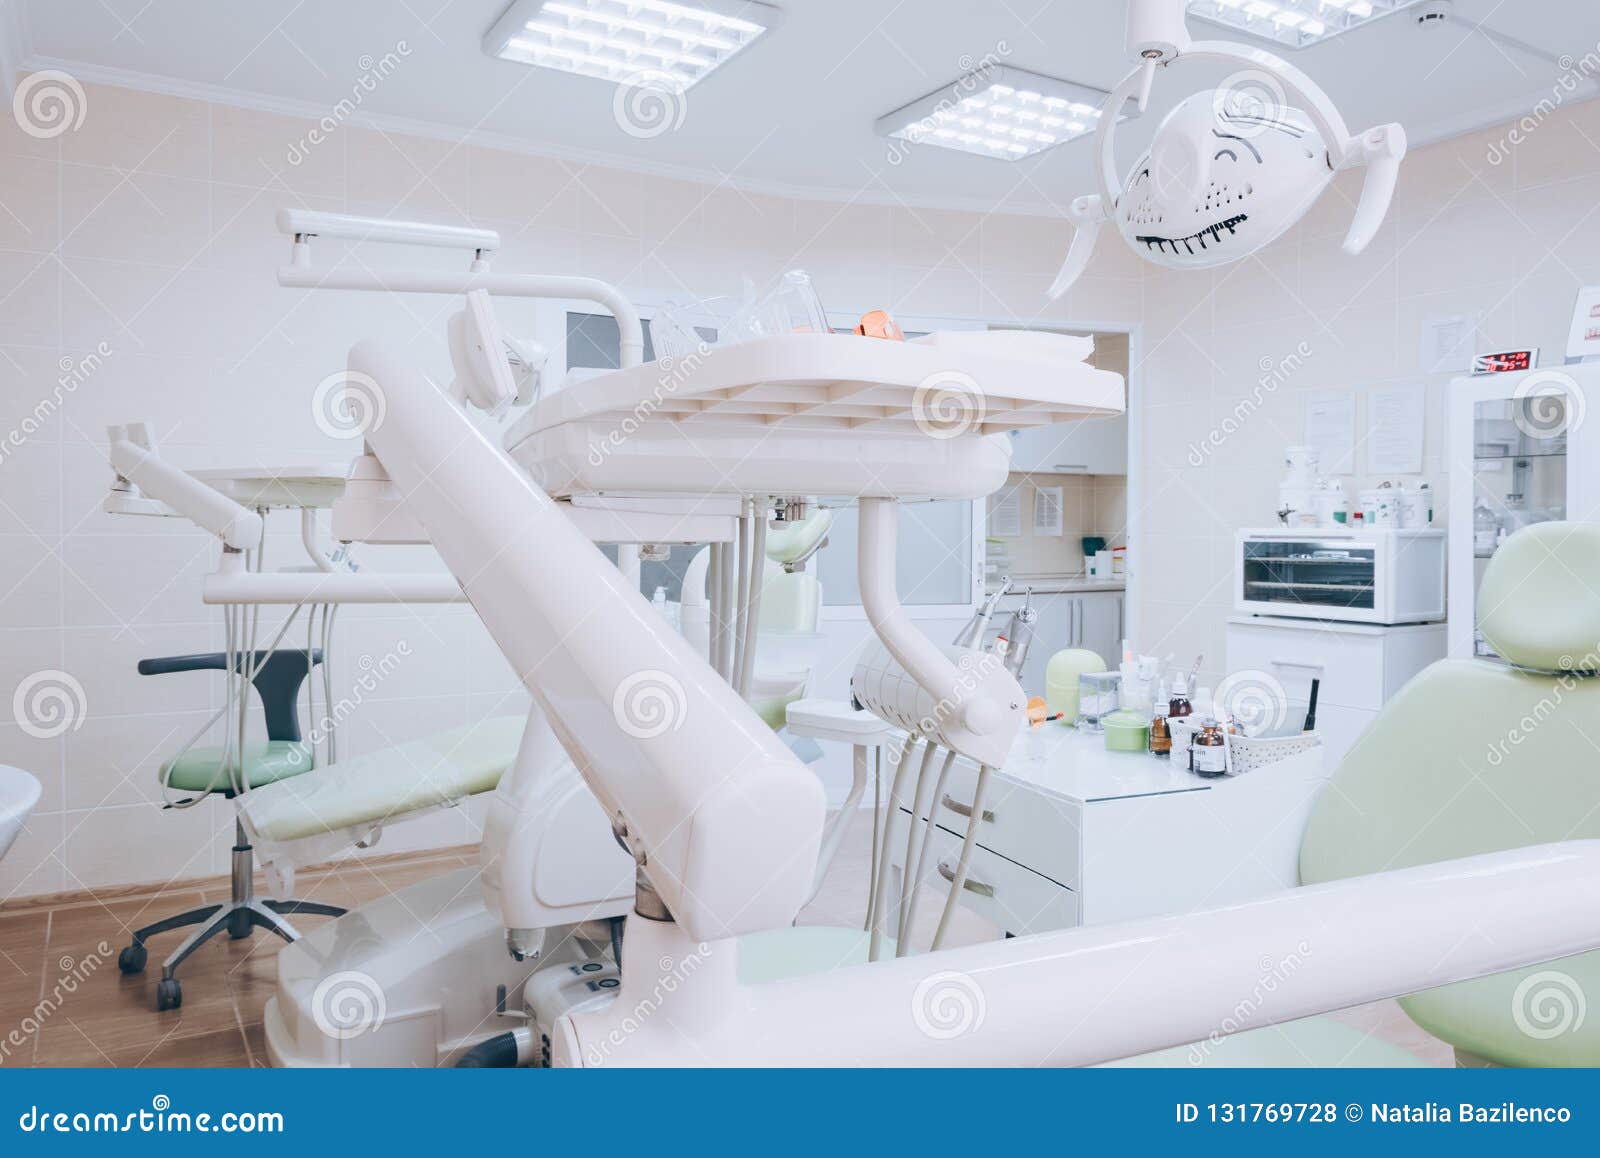 Dental Clinic Interior With Modern Dentistry Equipment